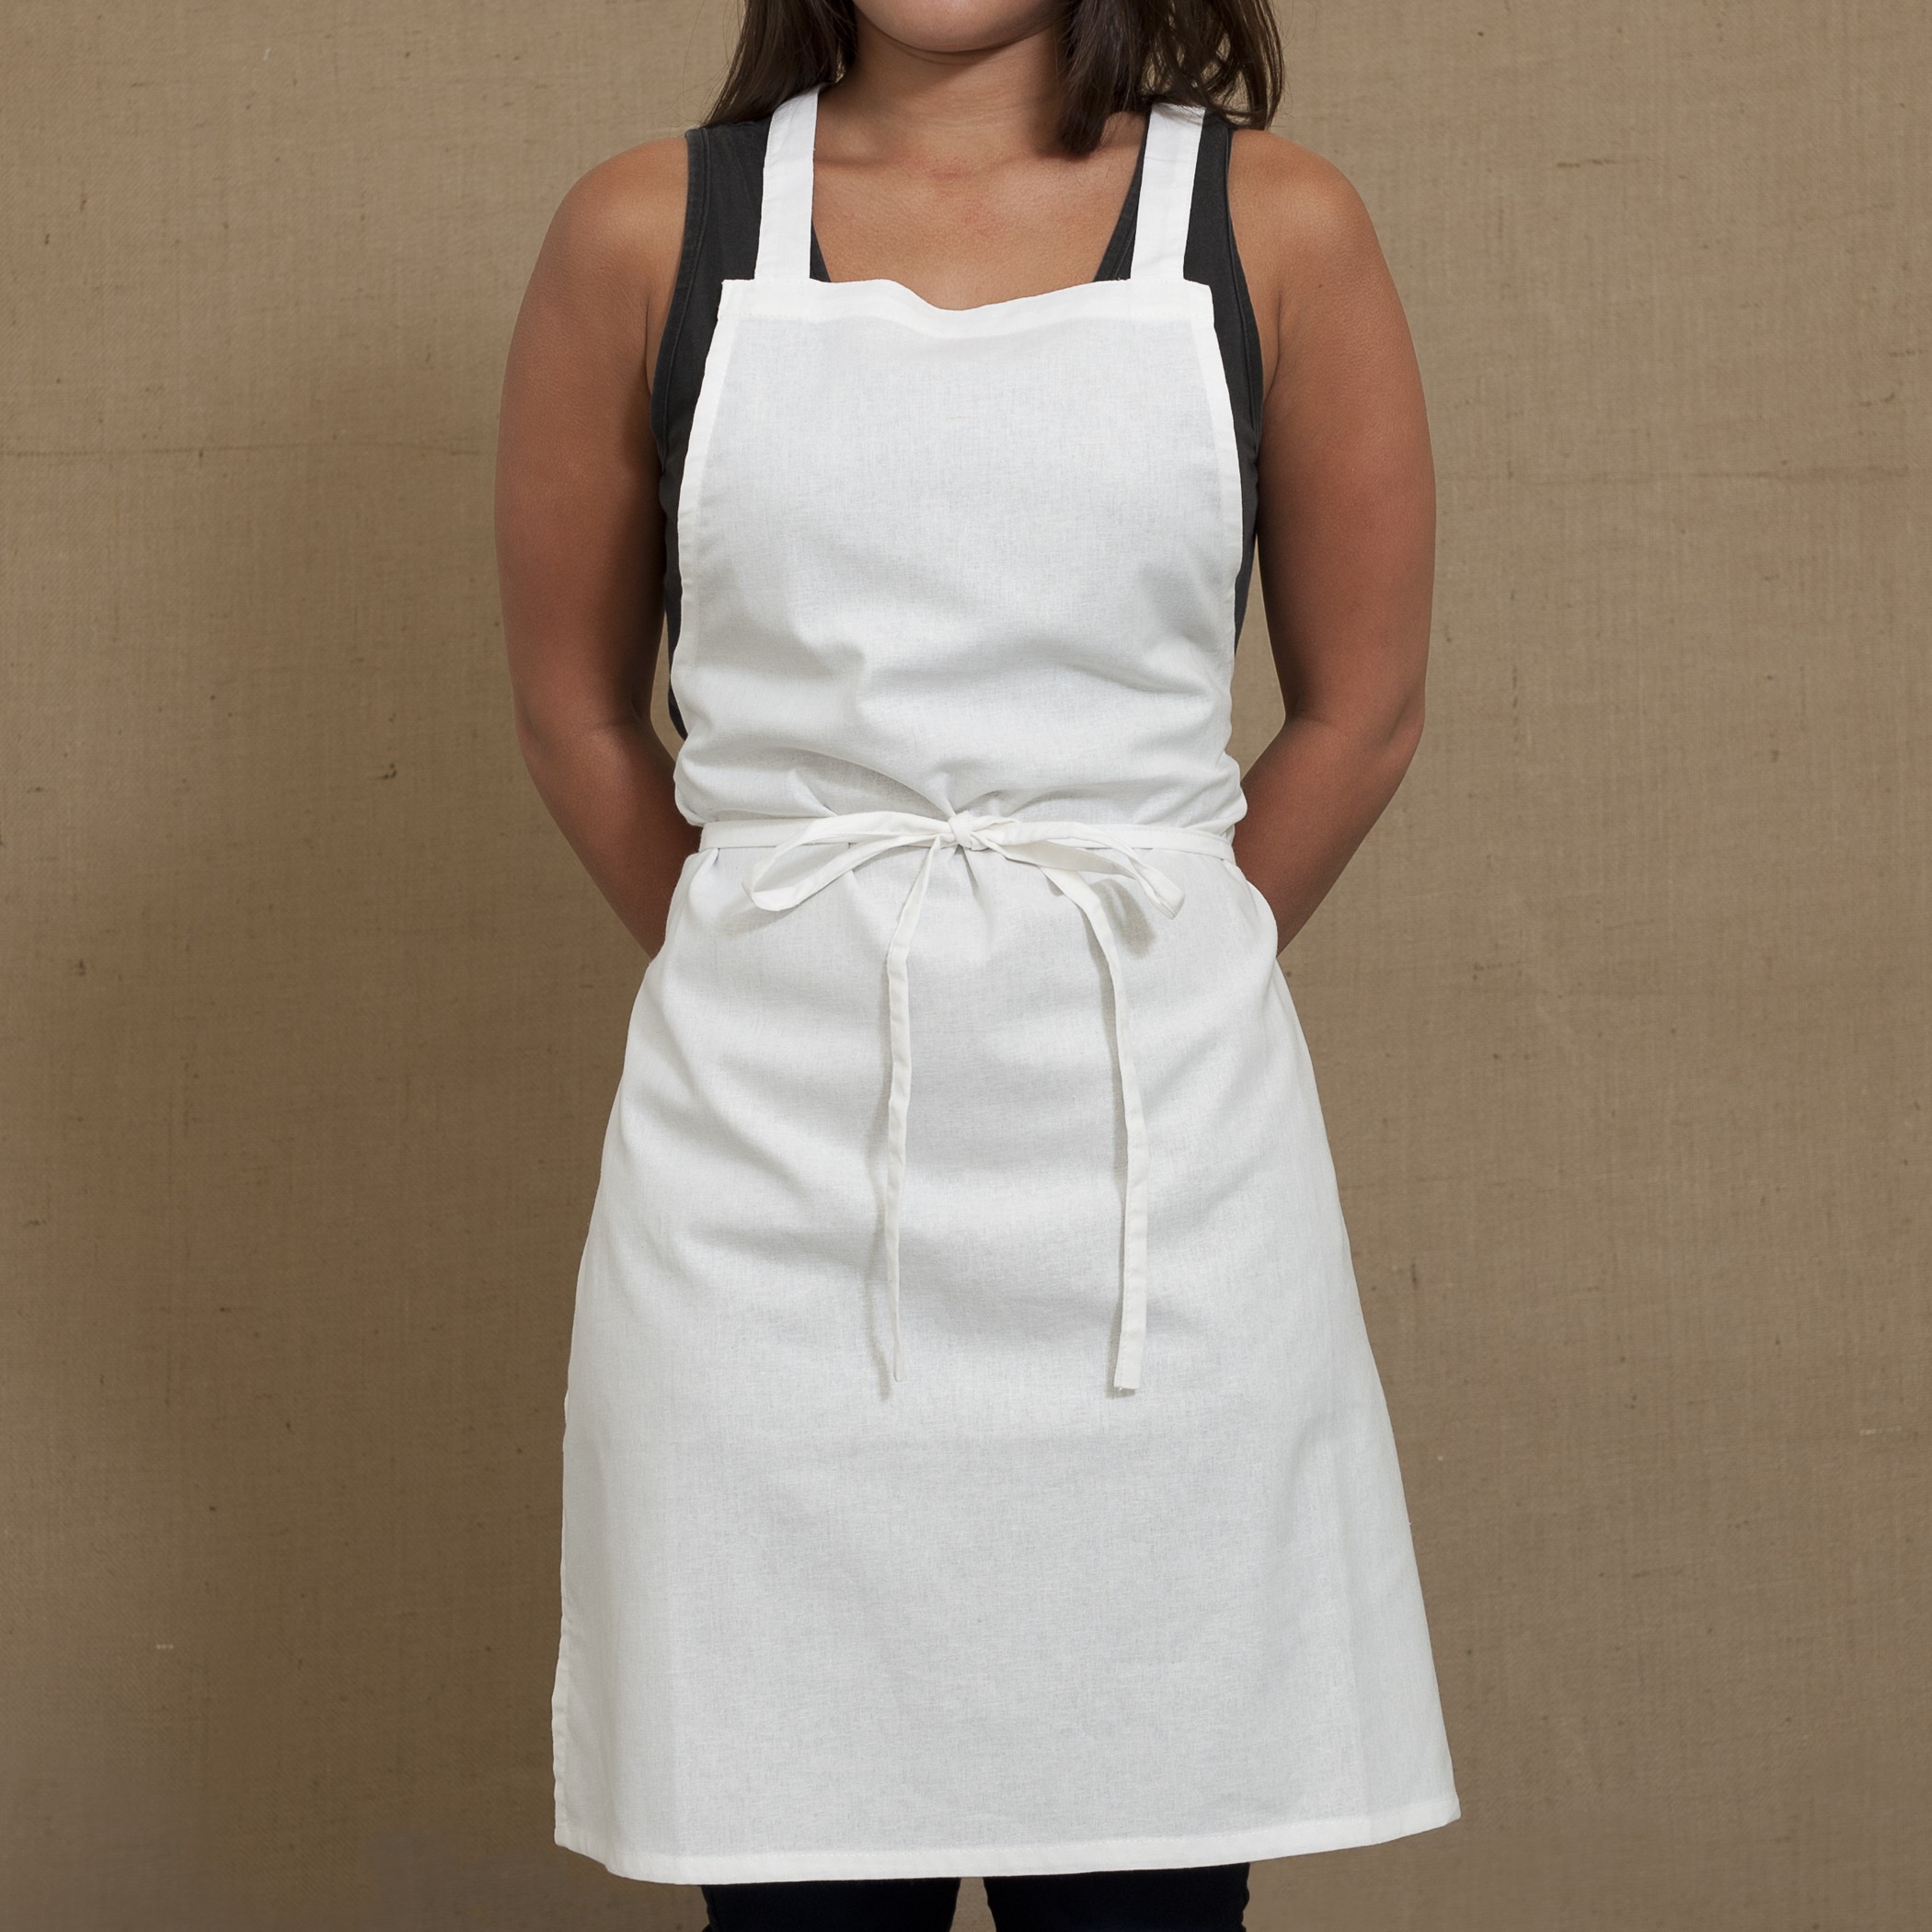 Why should you wear an apron when performing your household chores 